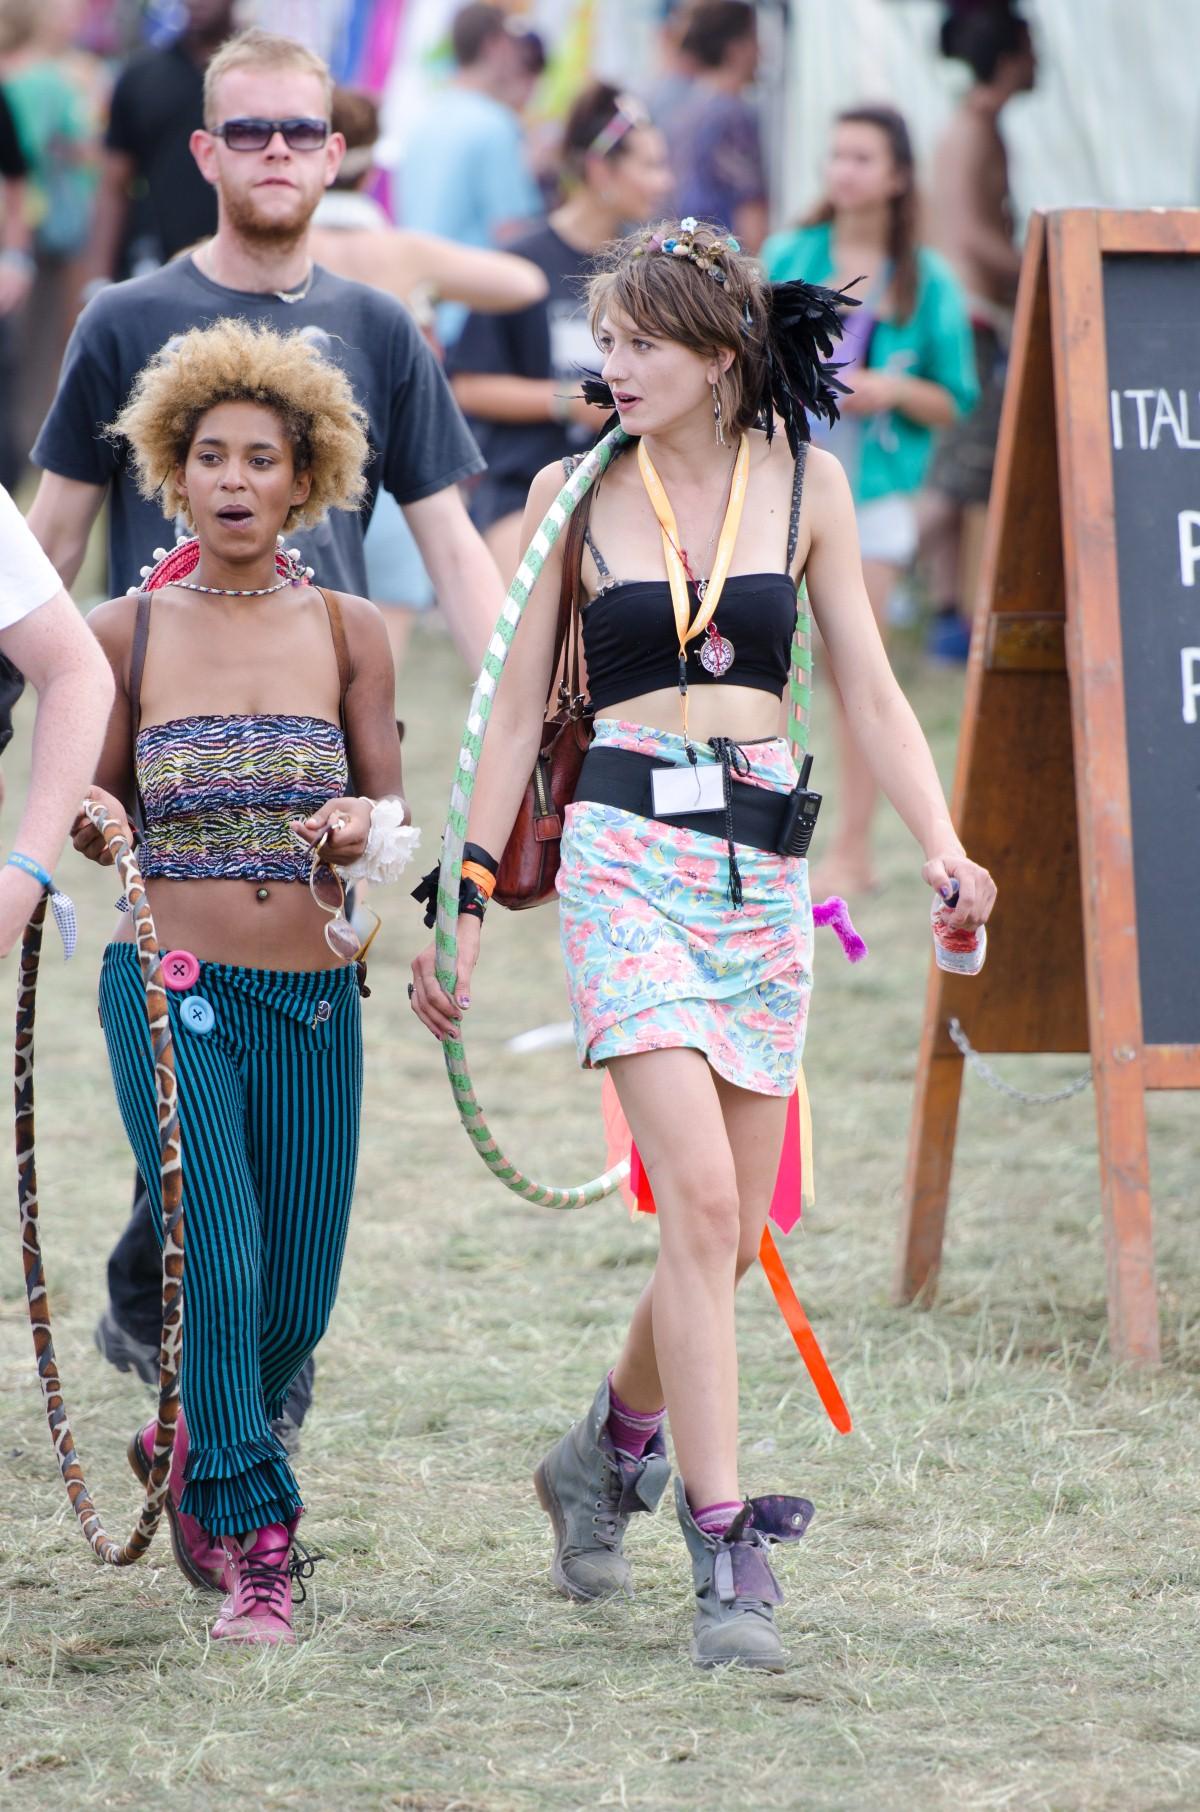 Image from Boomtown Festival 2013